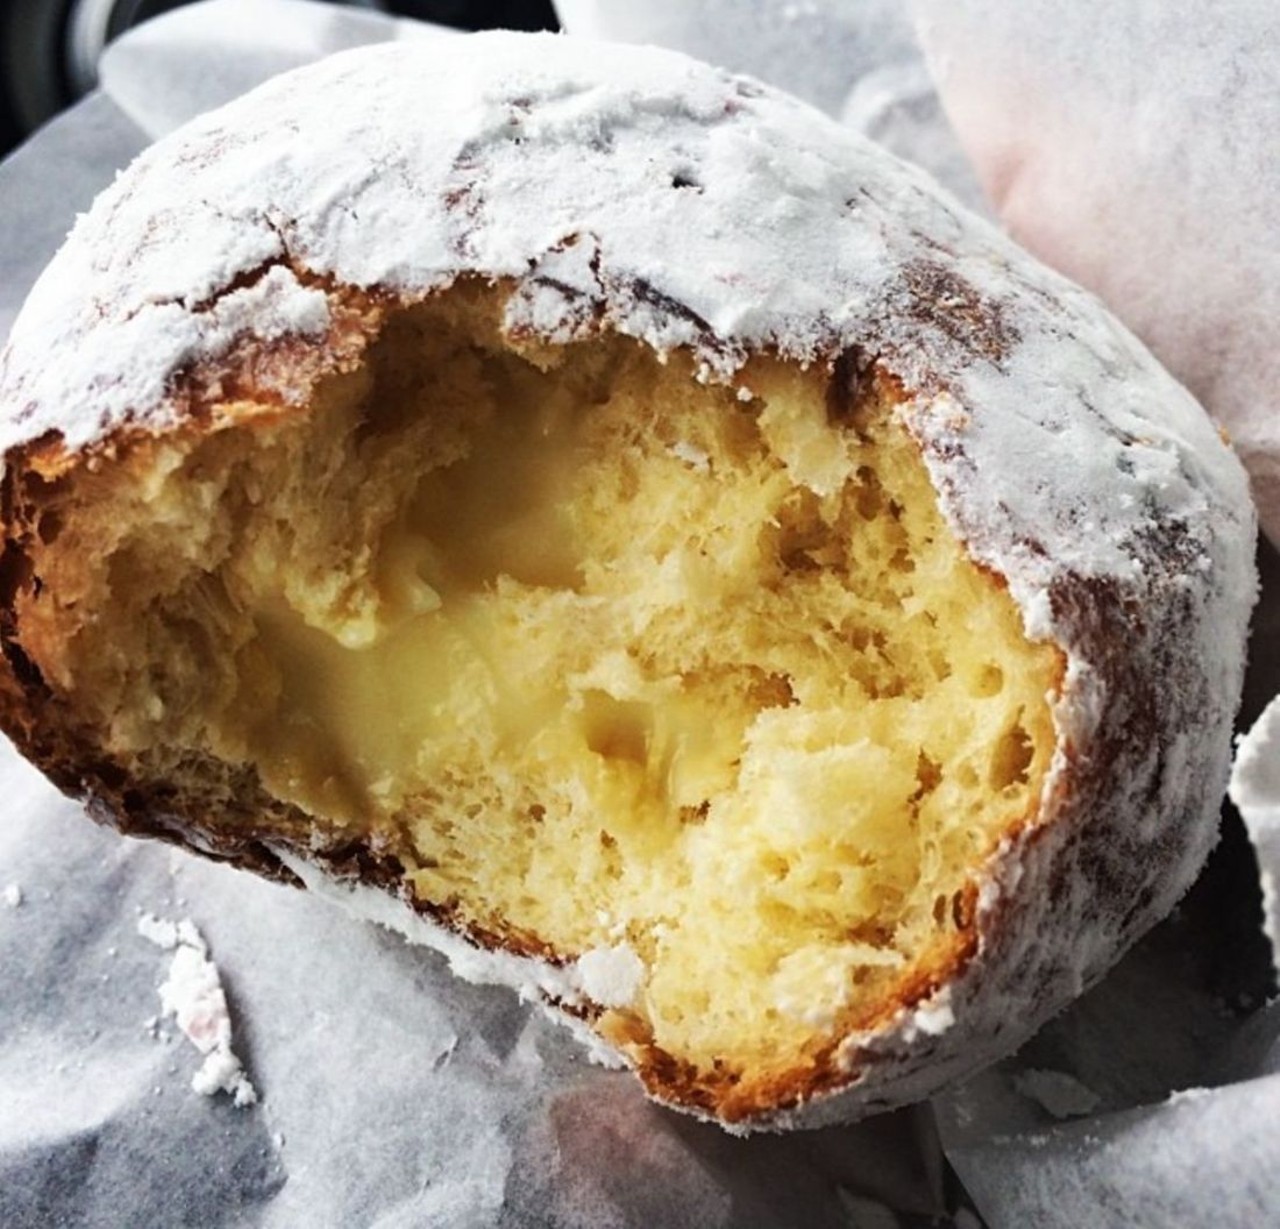 Pastry Peddler
Powdery on the outside, custardy on the inside. Find perfect paczki at Pastry Peddler. 
619 Packard St., Ann Arbor; 734-929-2976. Photo via Instagram user soumont.